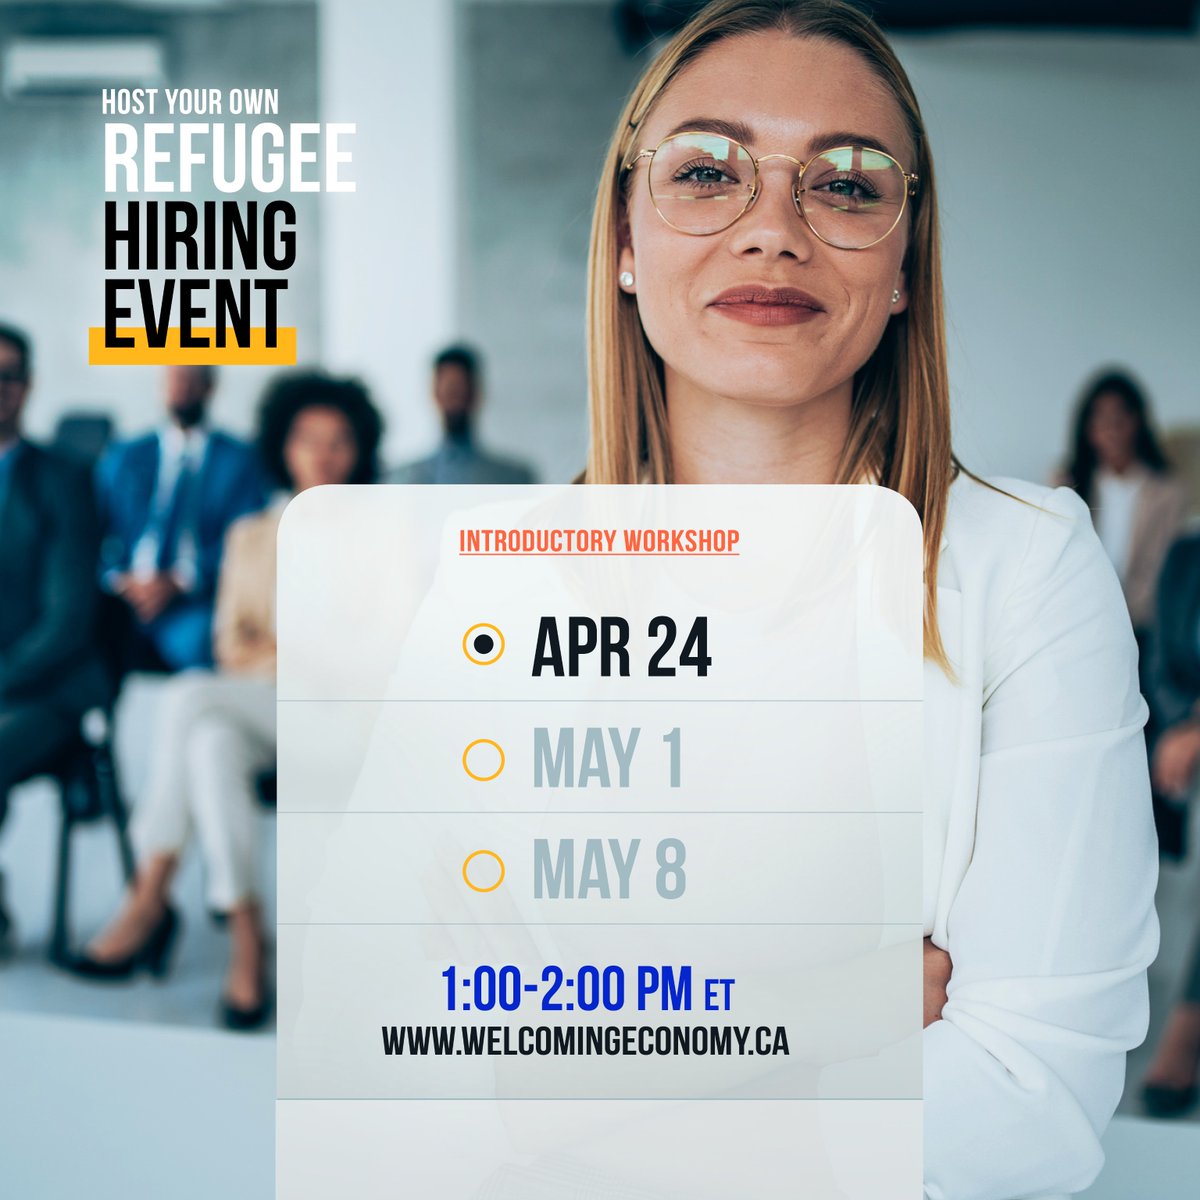 Host your own Refugee Hiring Event! Learn how to utilize a unique and successful hiring model
that connects #refugees directly with #employers!

Register for the Introductory Workshop run by #WelcomingEconomy 2024: bit.ly/wetraining-2024

#RefugeesWelcome
#WithRefugees